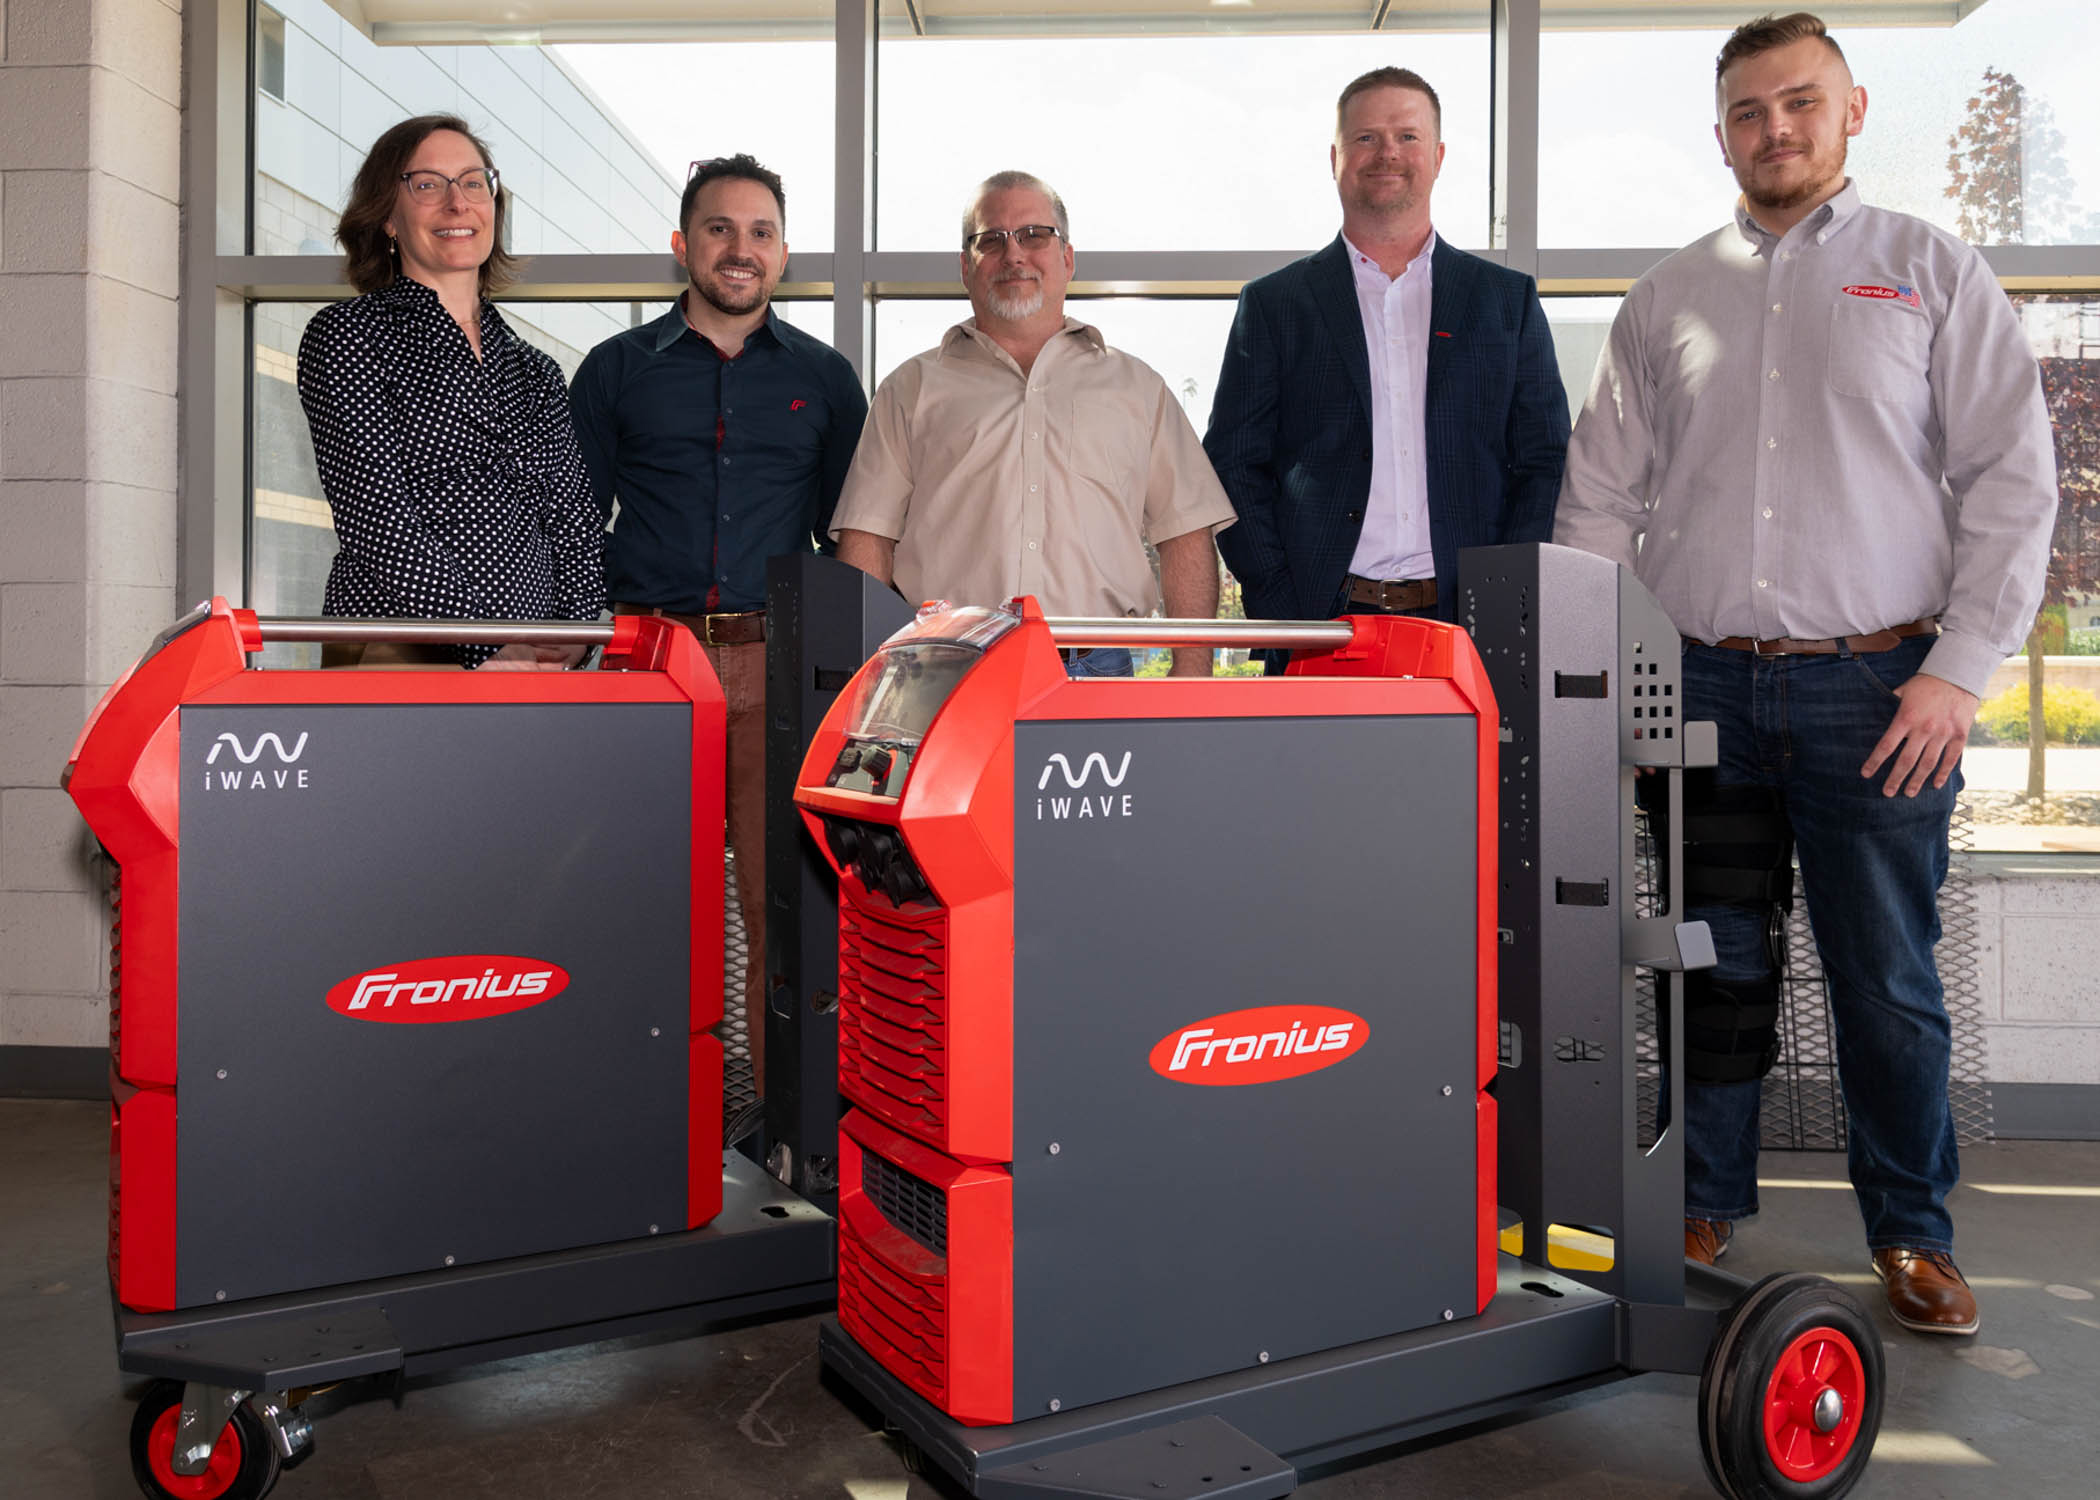 Fronius continues its support of Penn College’s welding program